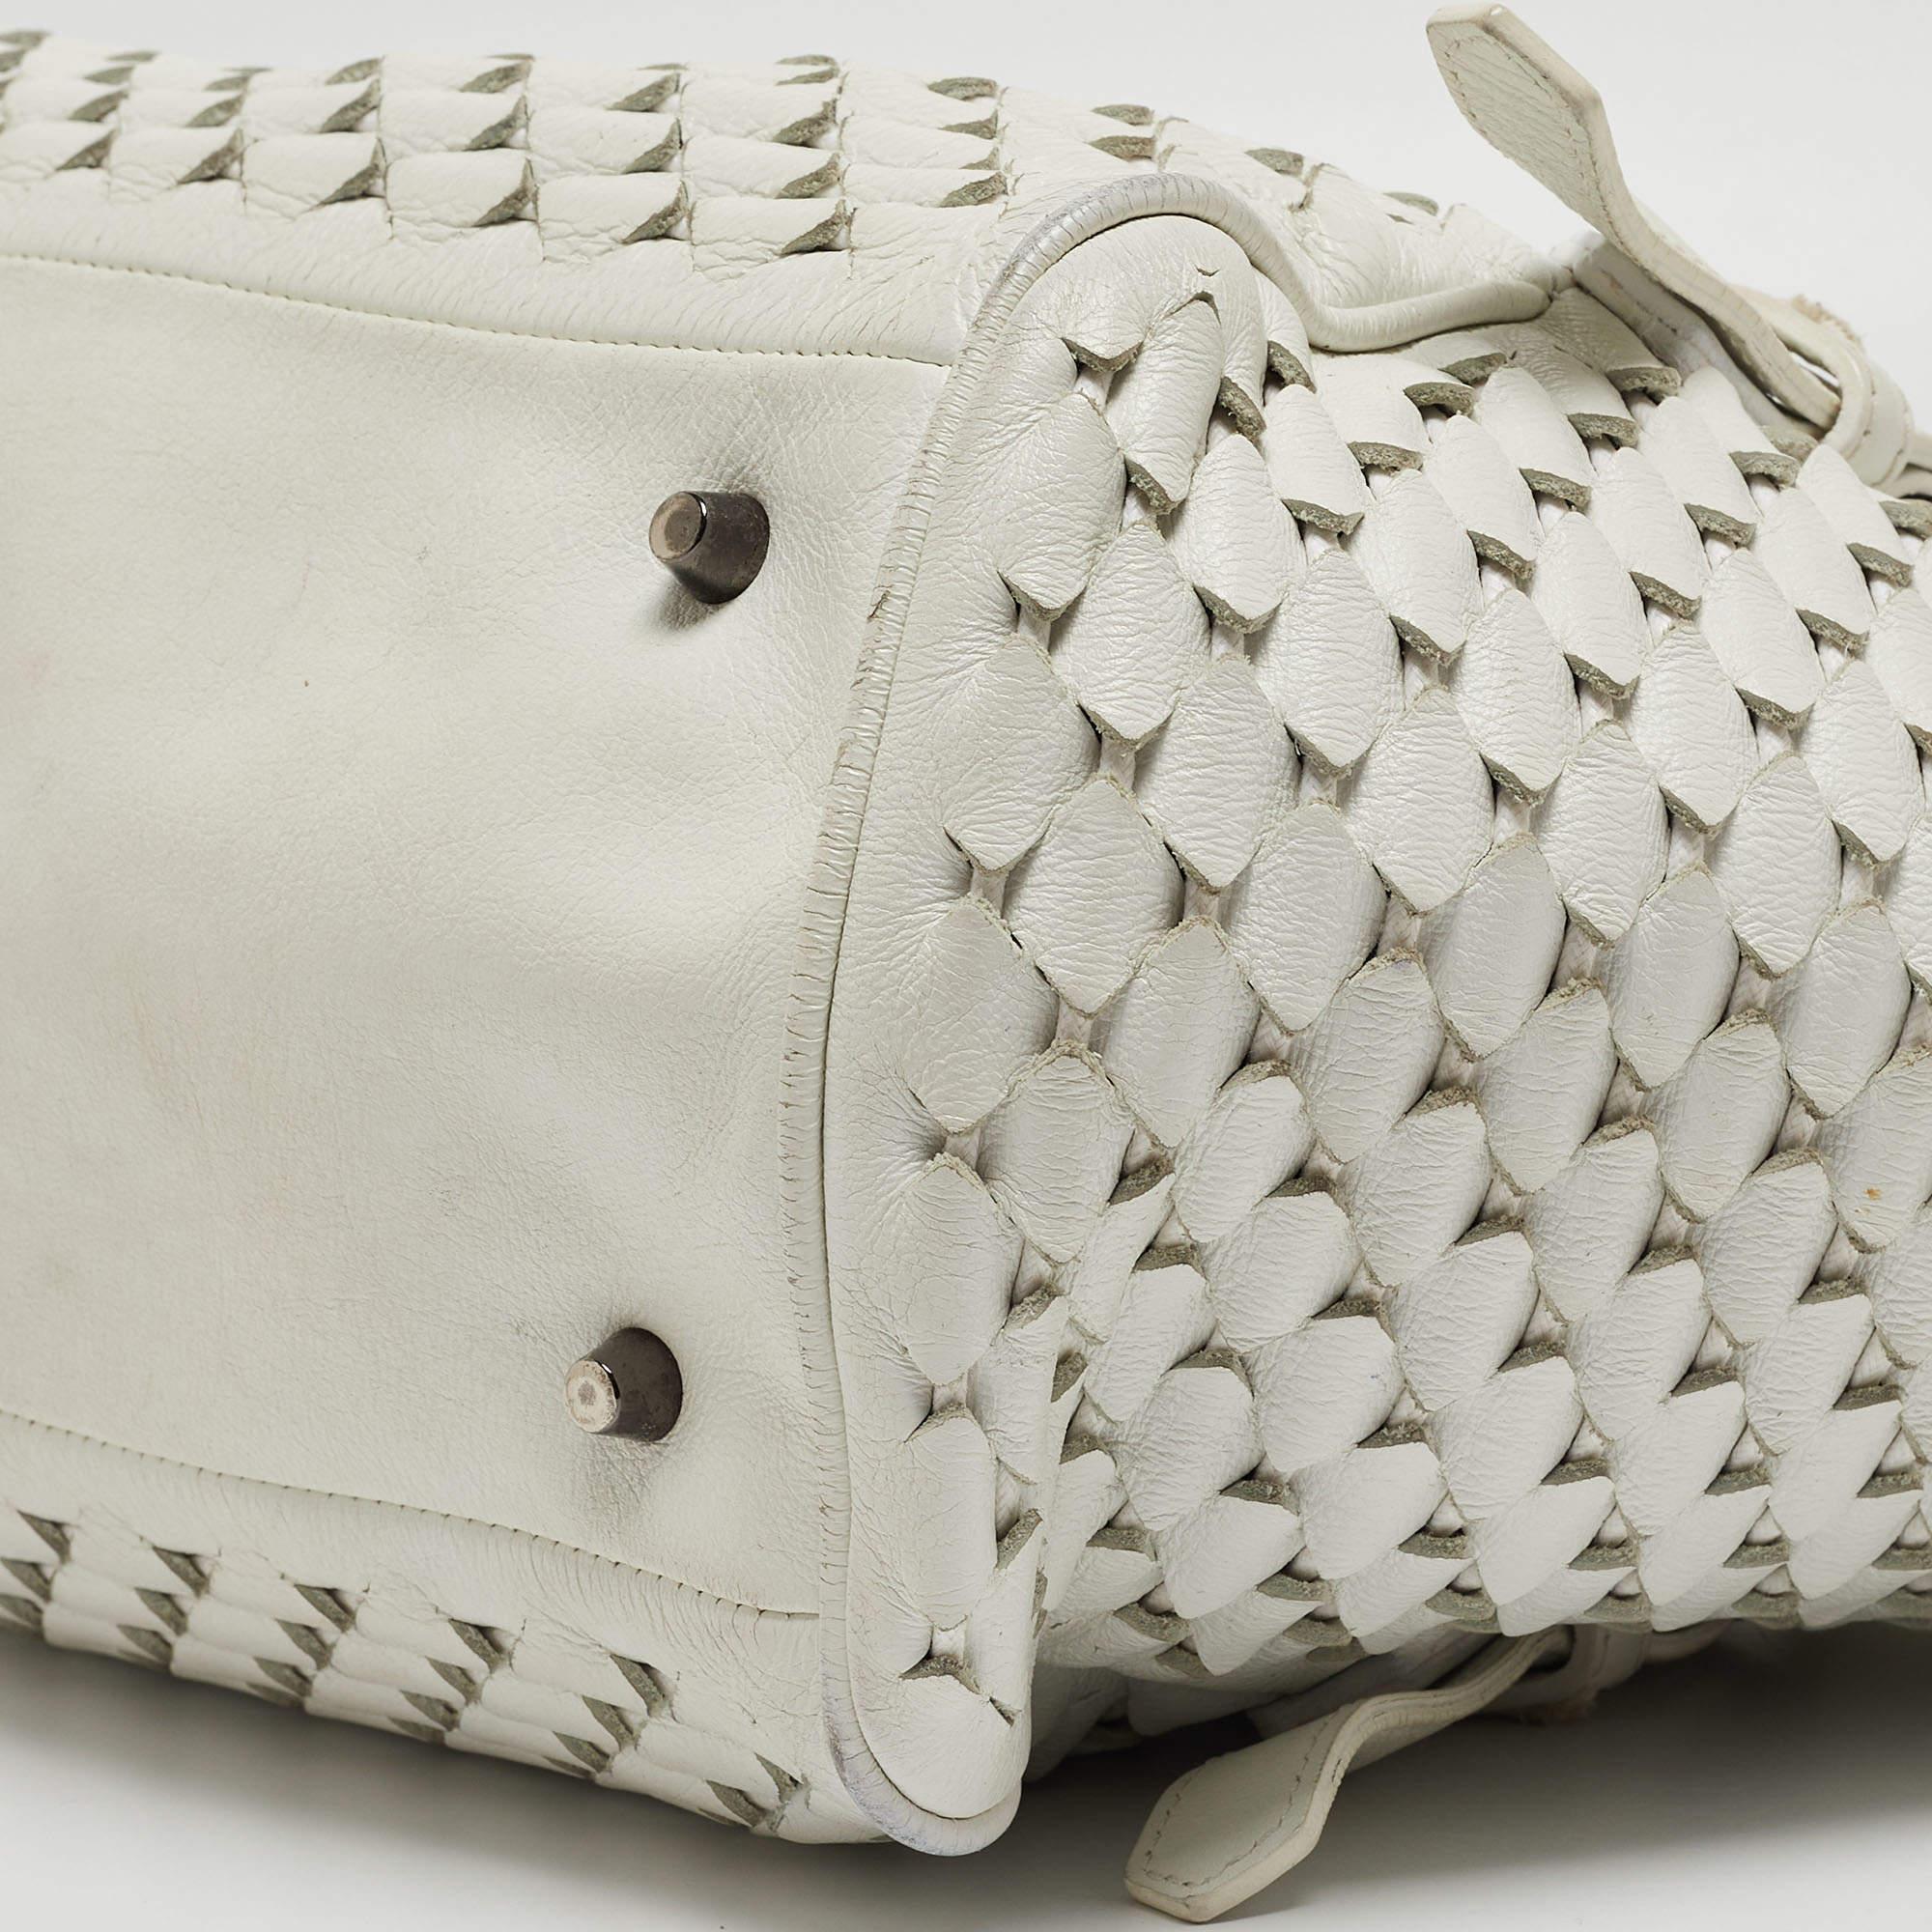 Burberry White Woven Leather Tote For Sale 10